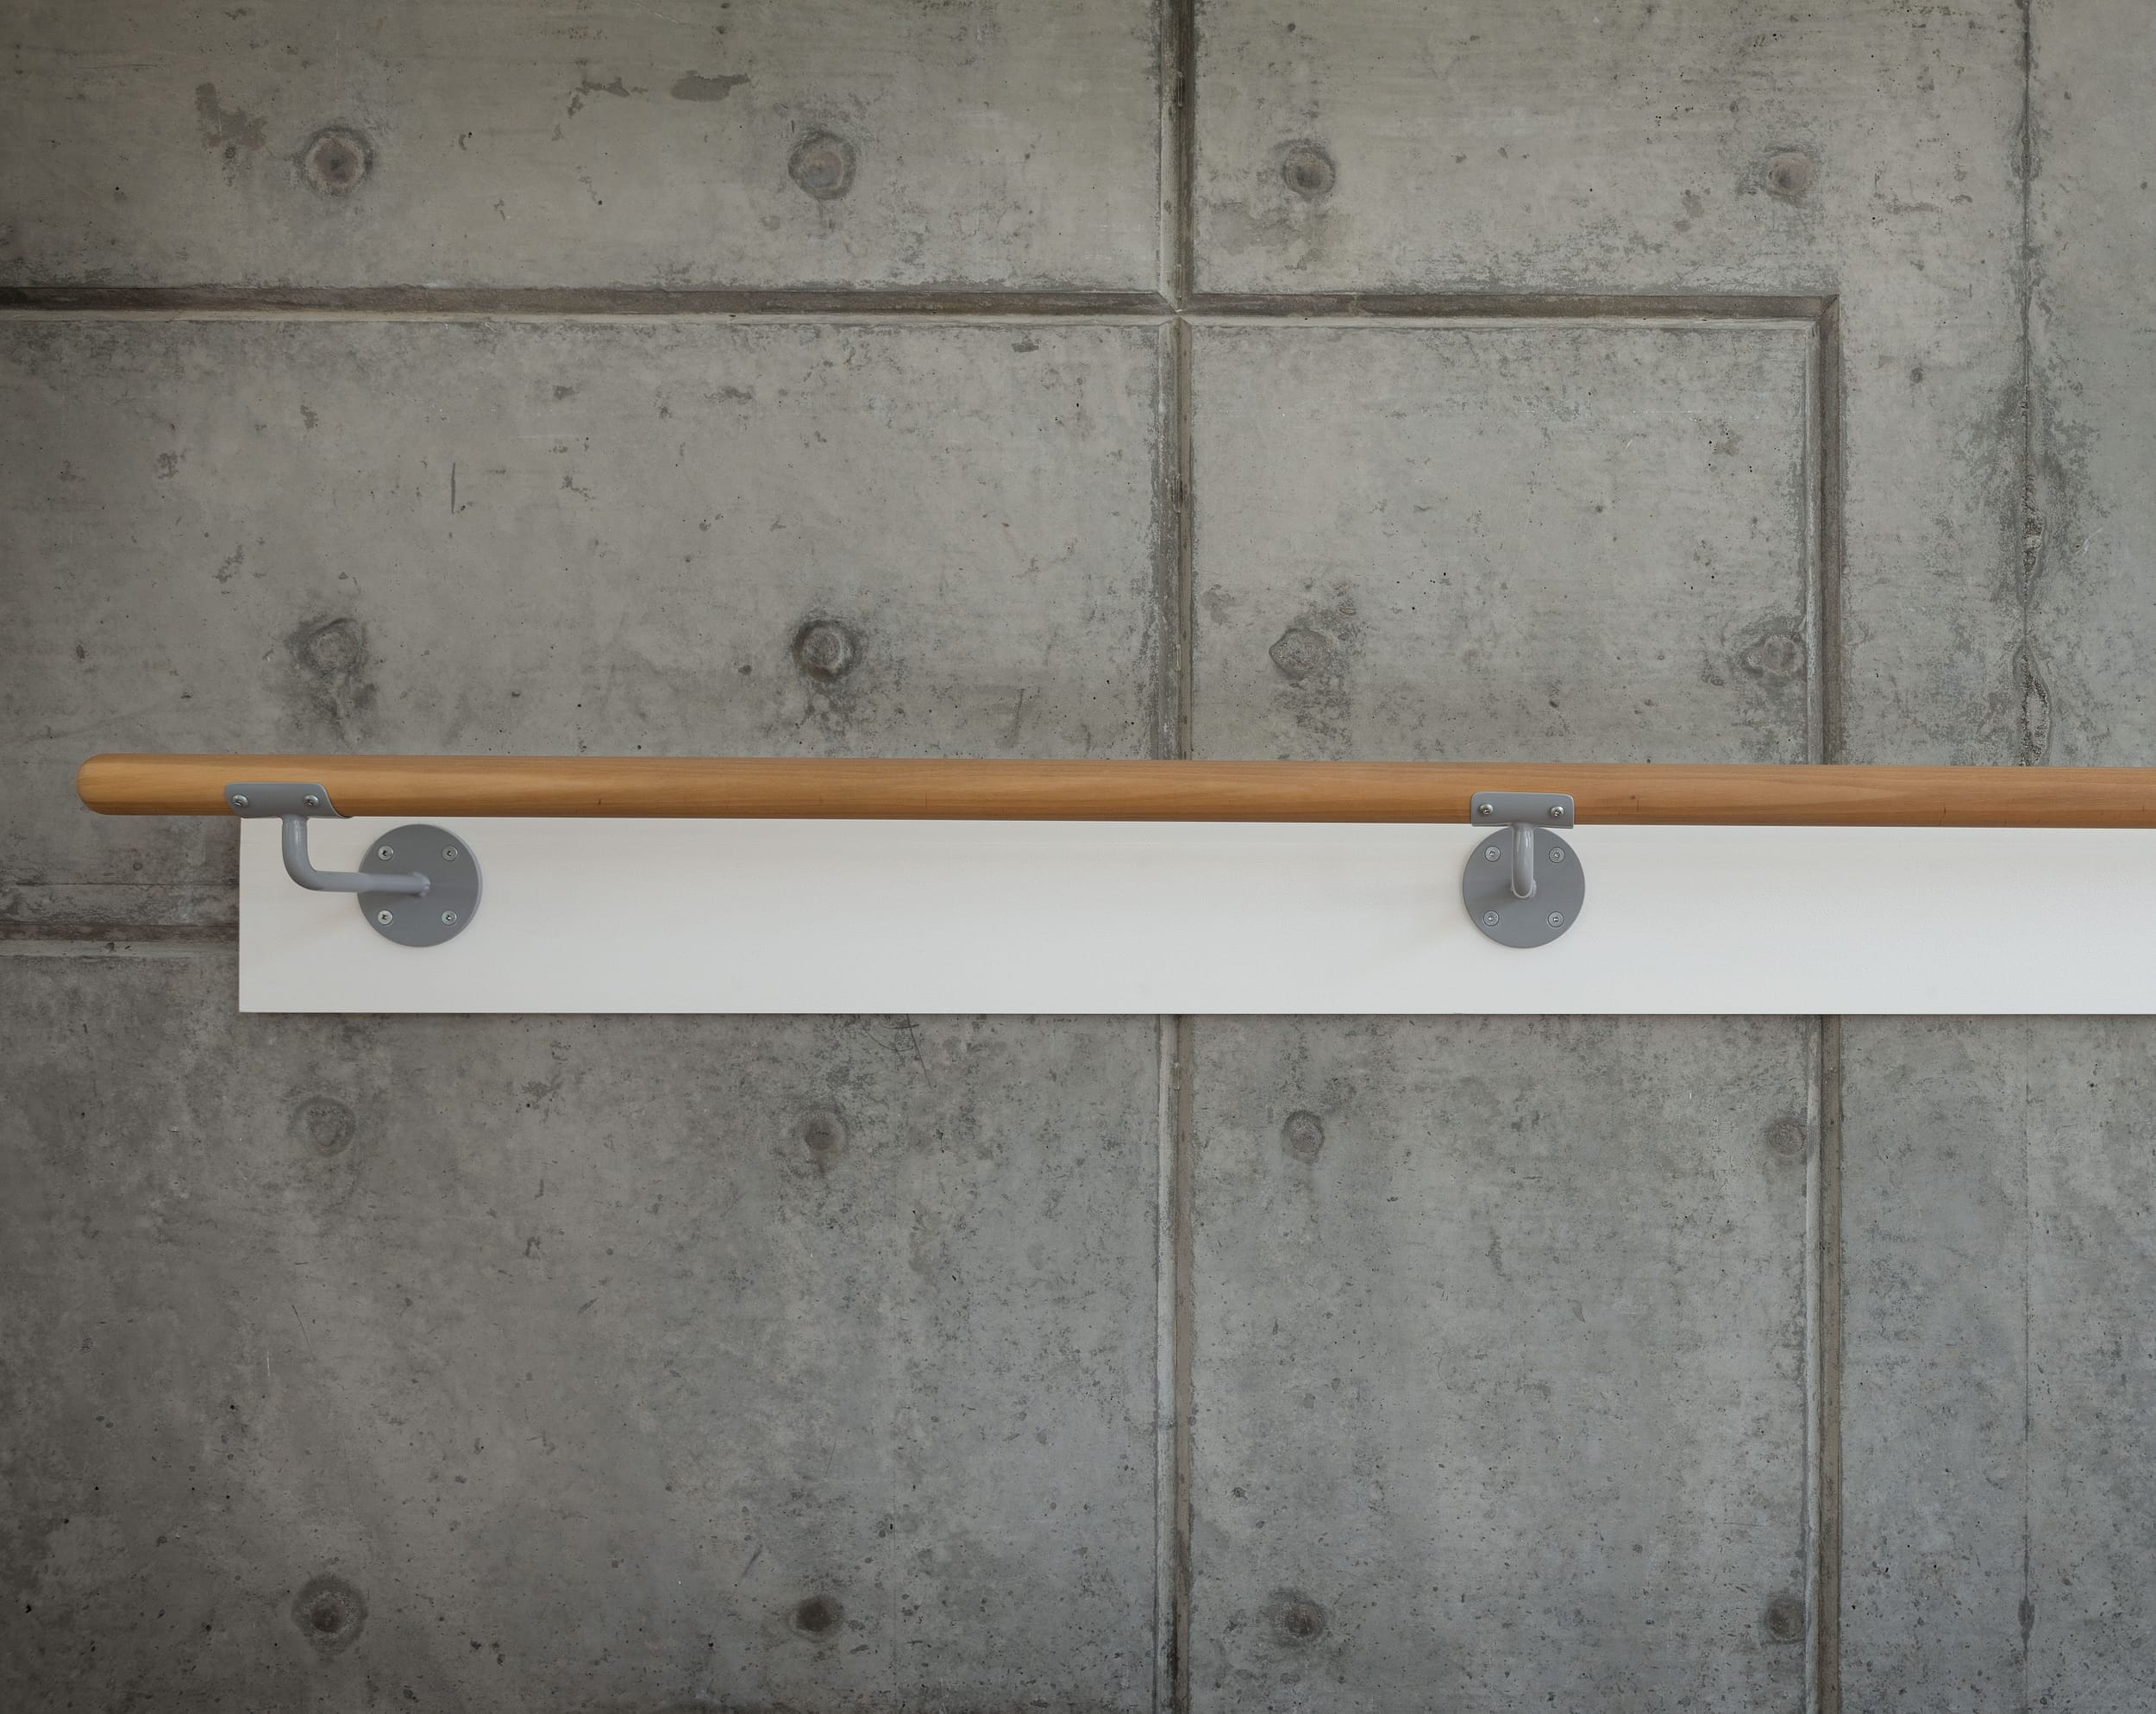 A wooden rail hanging on a concrete wall.